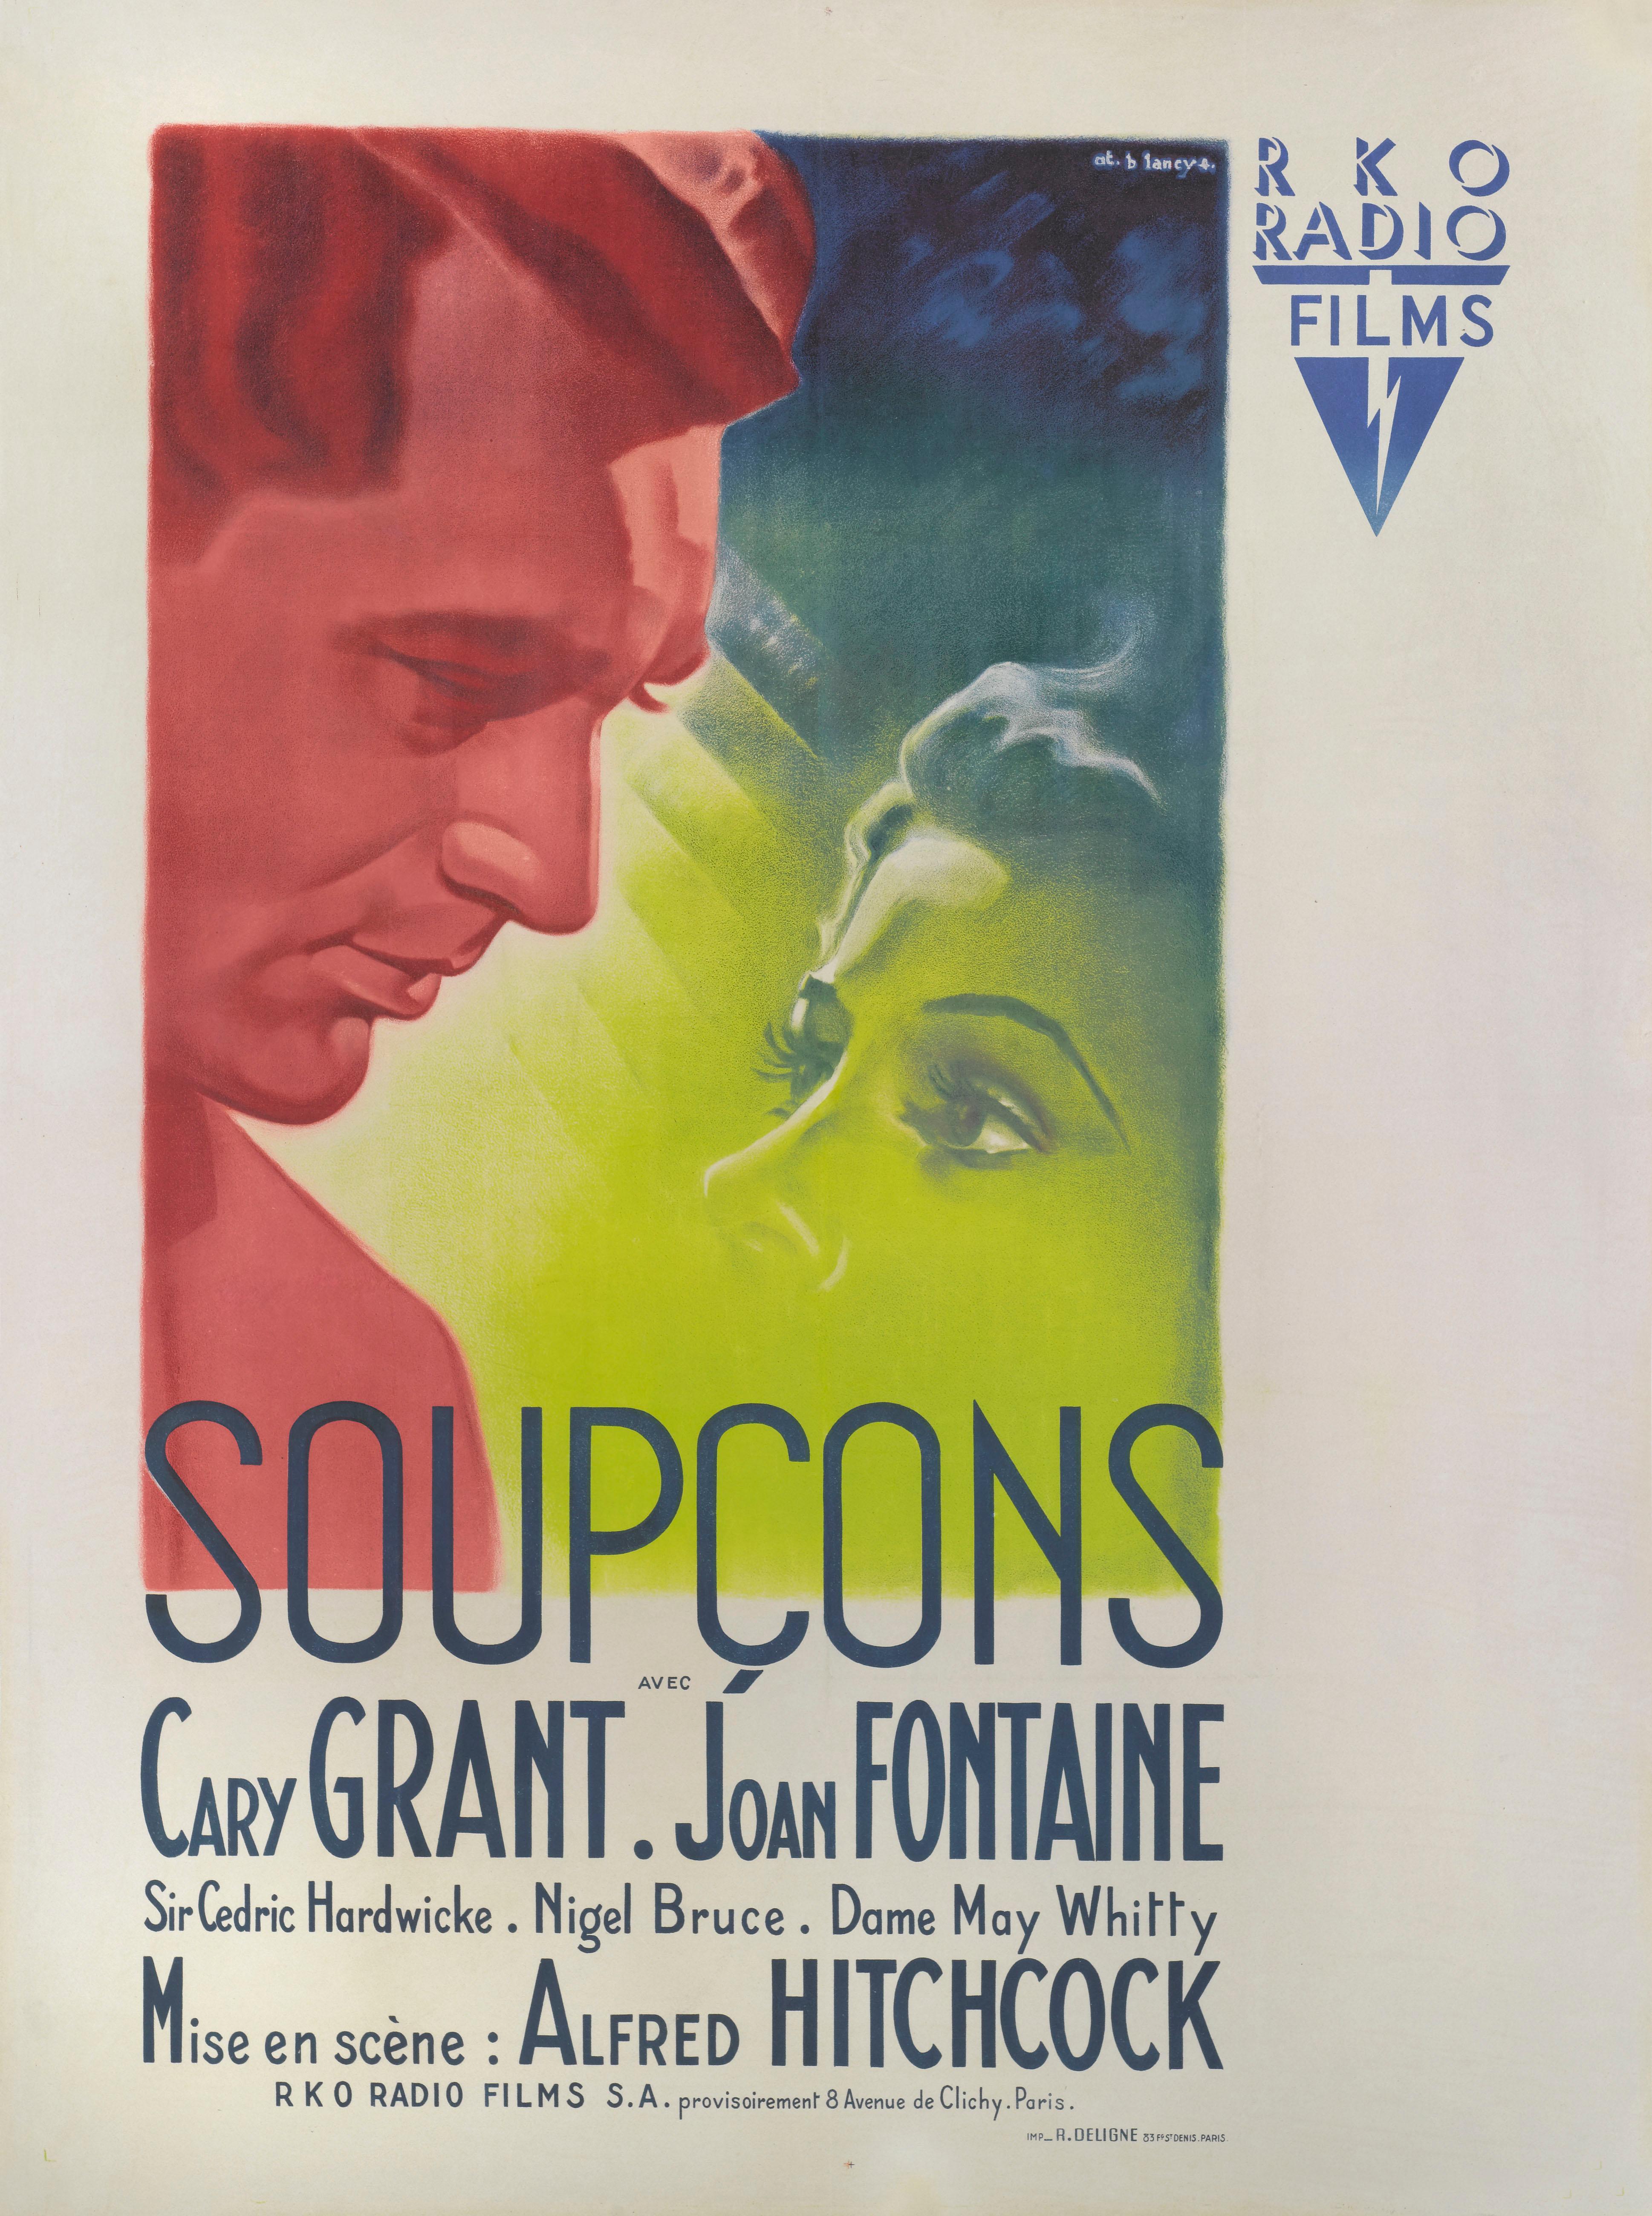 French Soupcons Poster, Film Poster